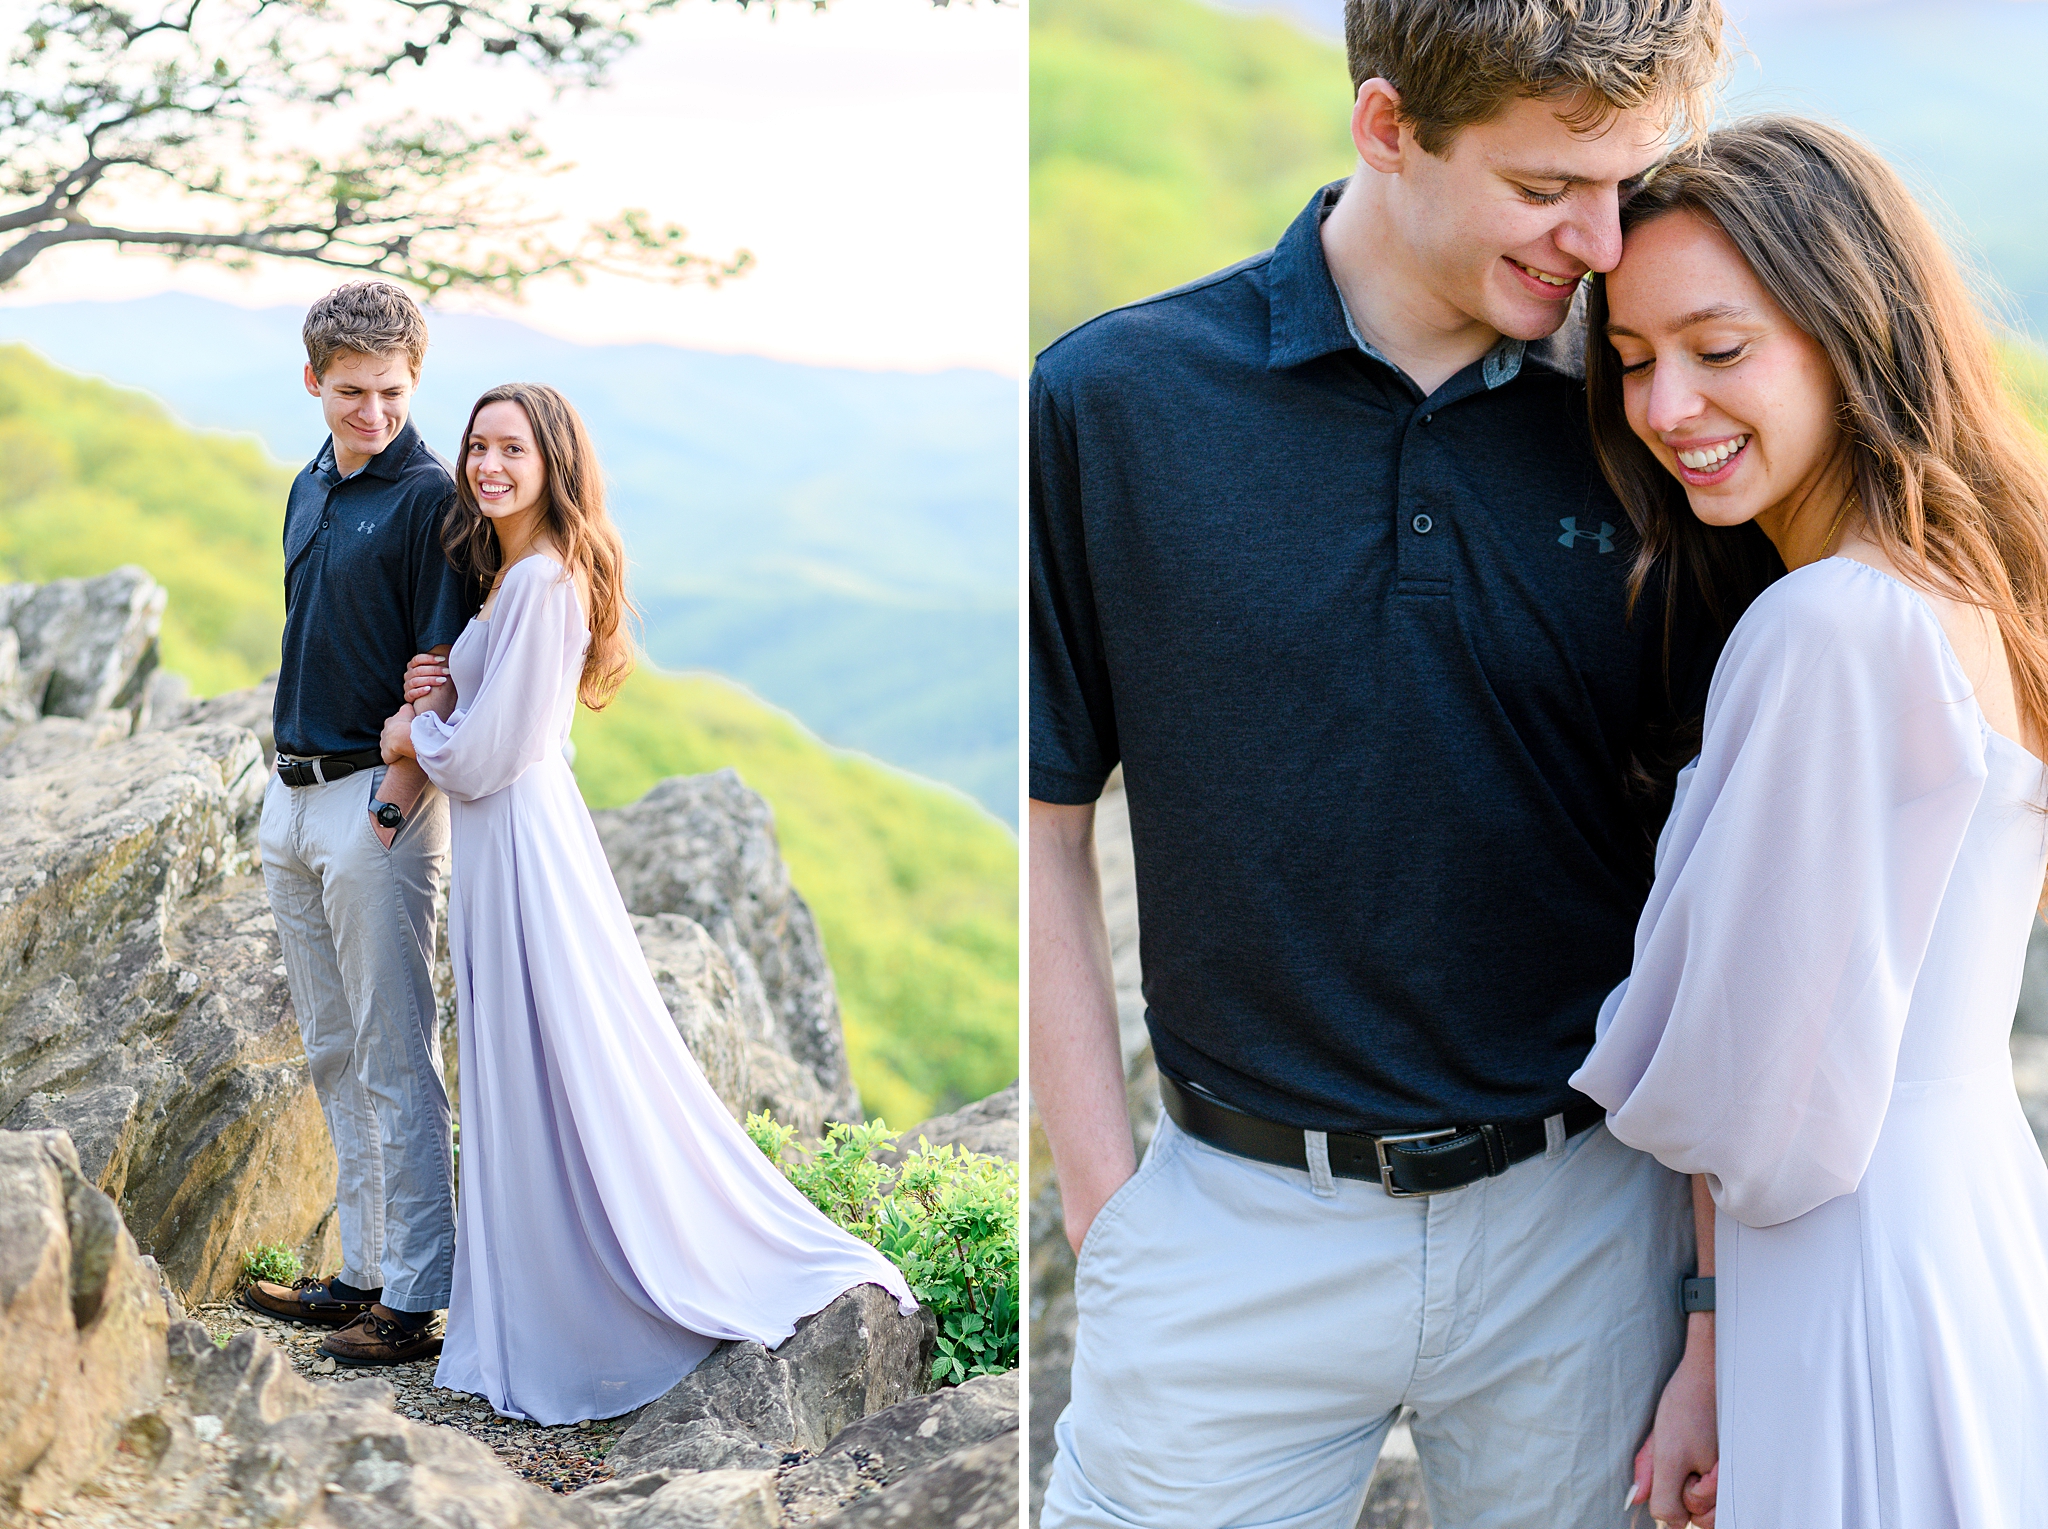 Two people smiling and embracing against the breathtaking backdrop of Ravens Roost Overlook during their engagement shoot.